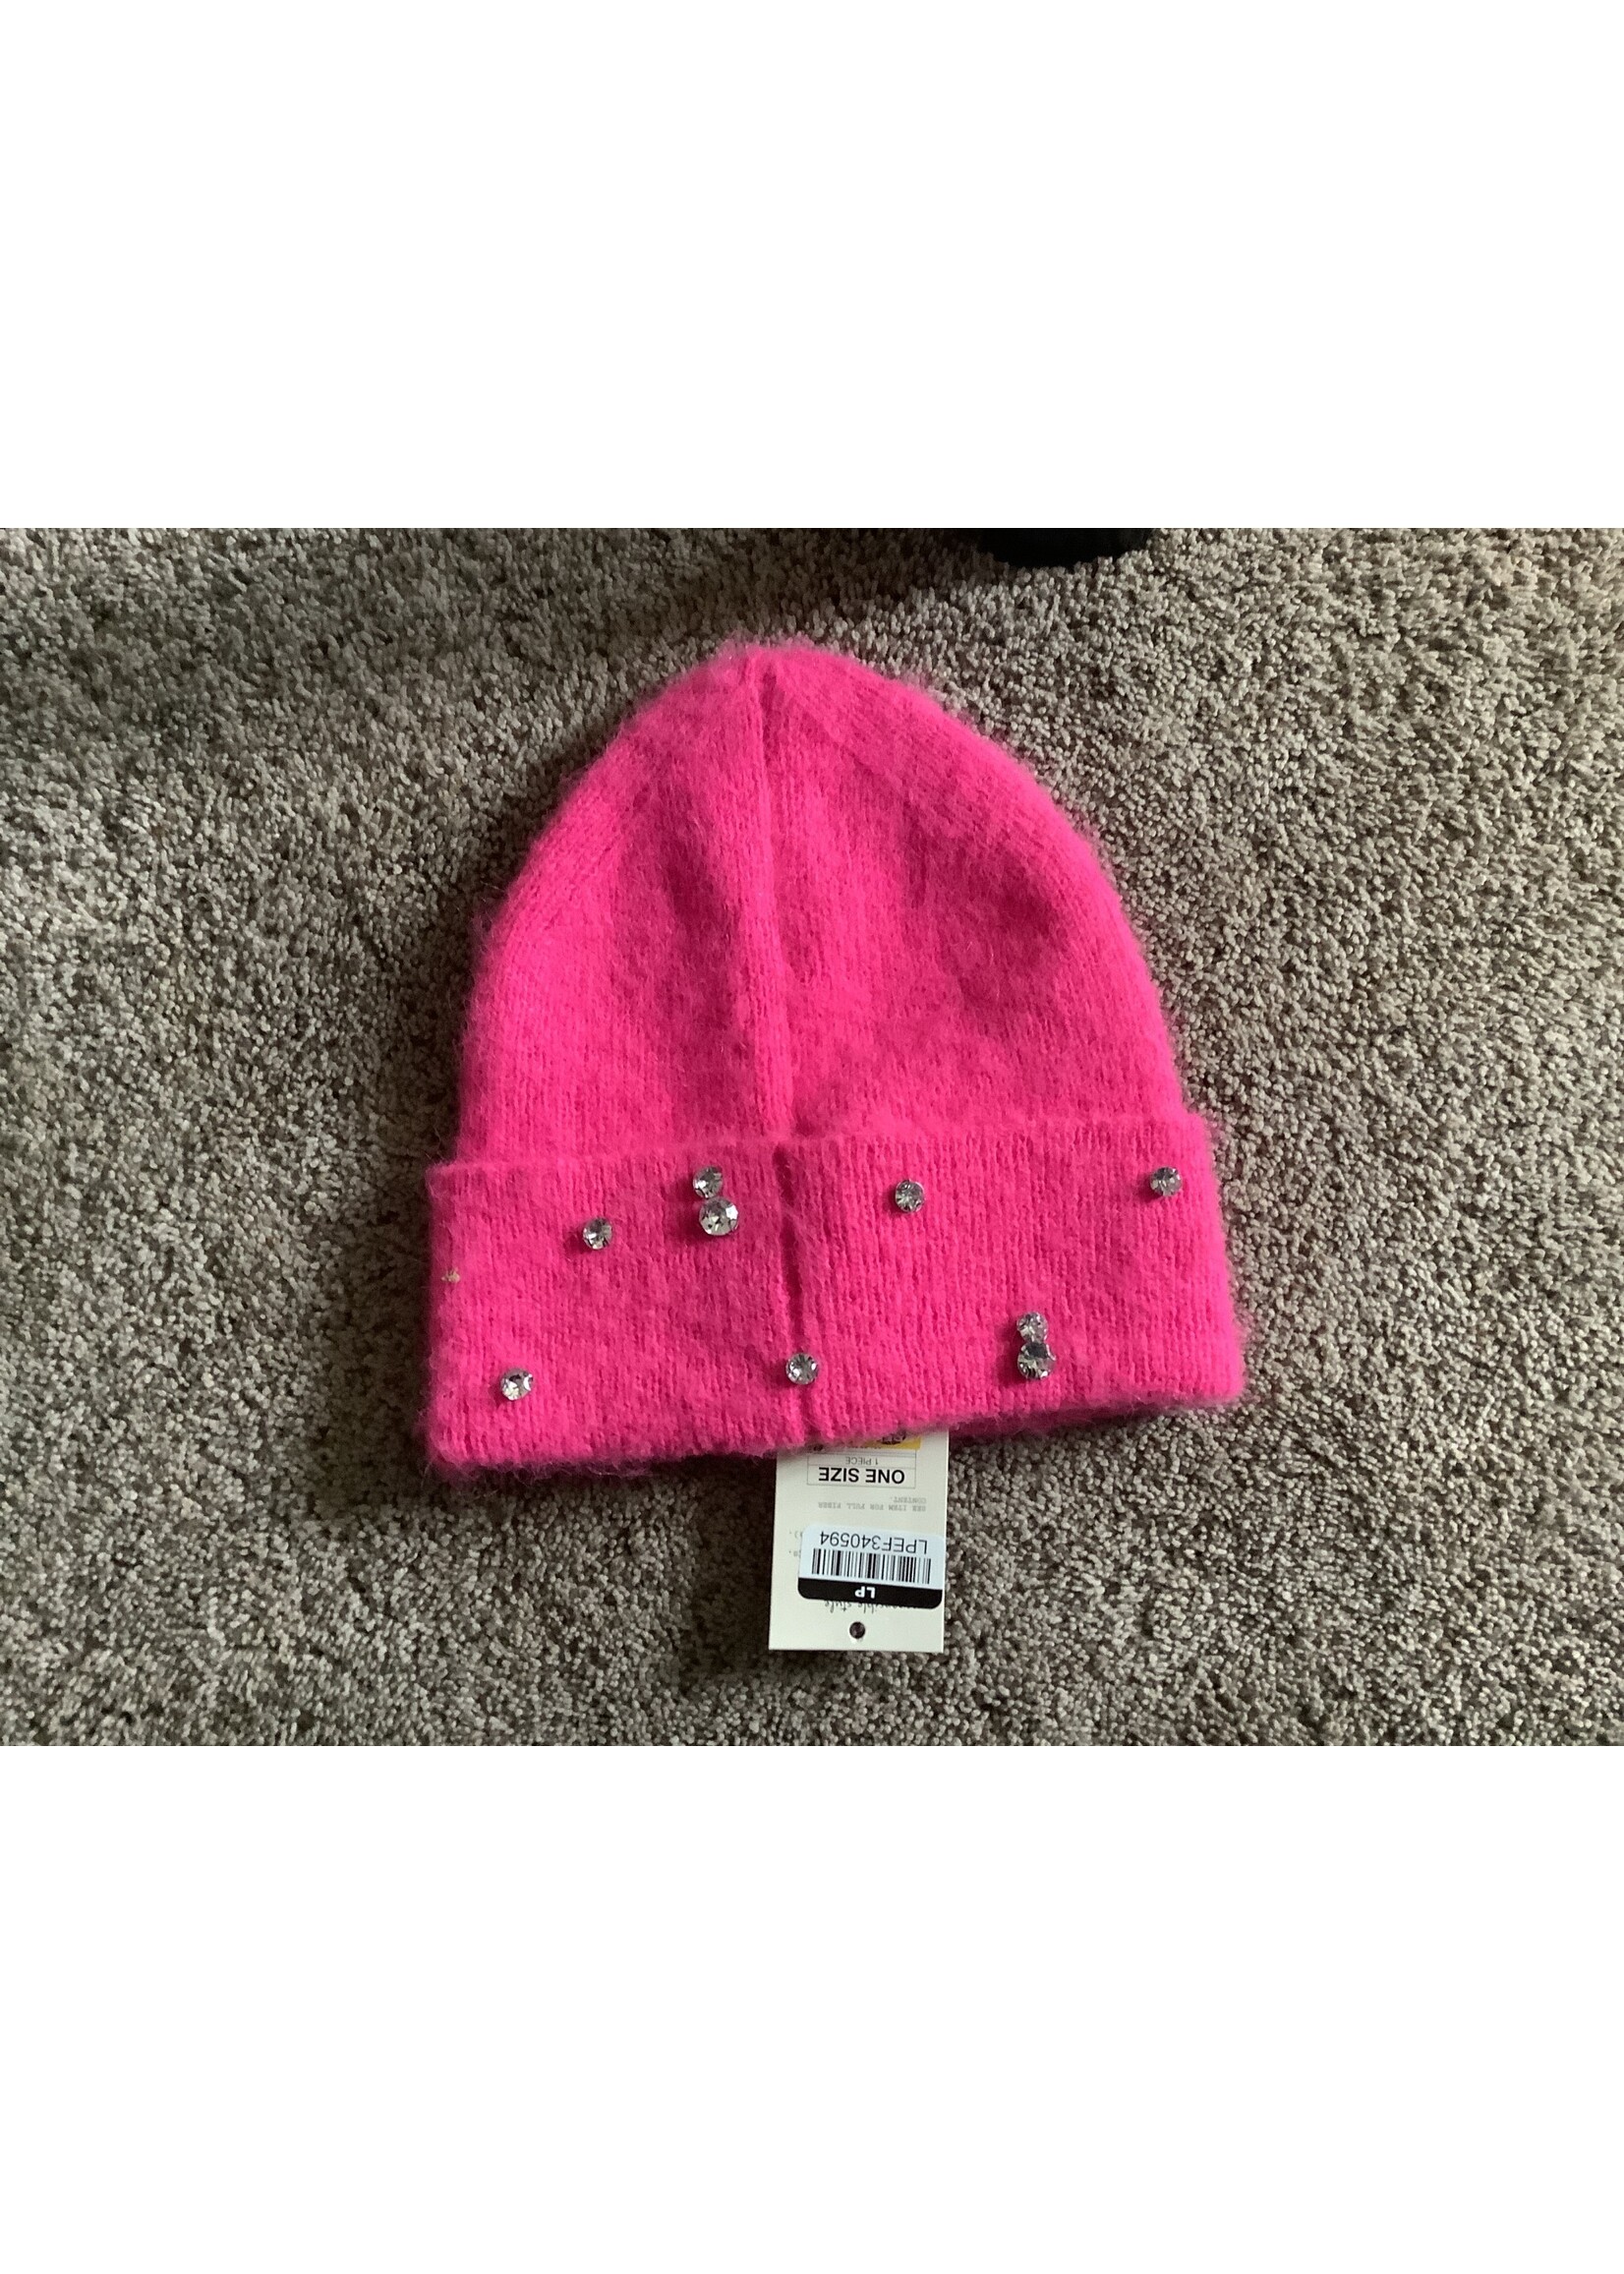 A NewDay Brushed Beanie Pink